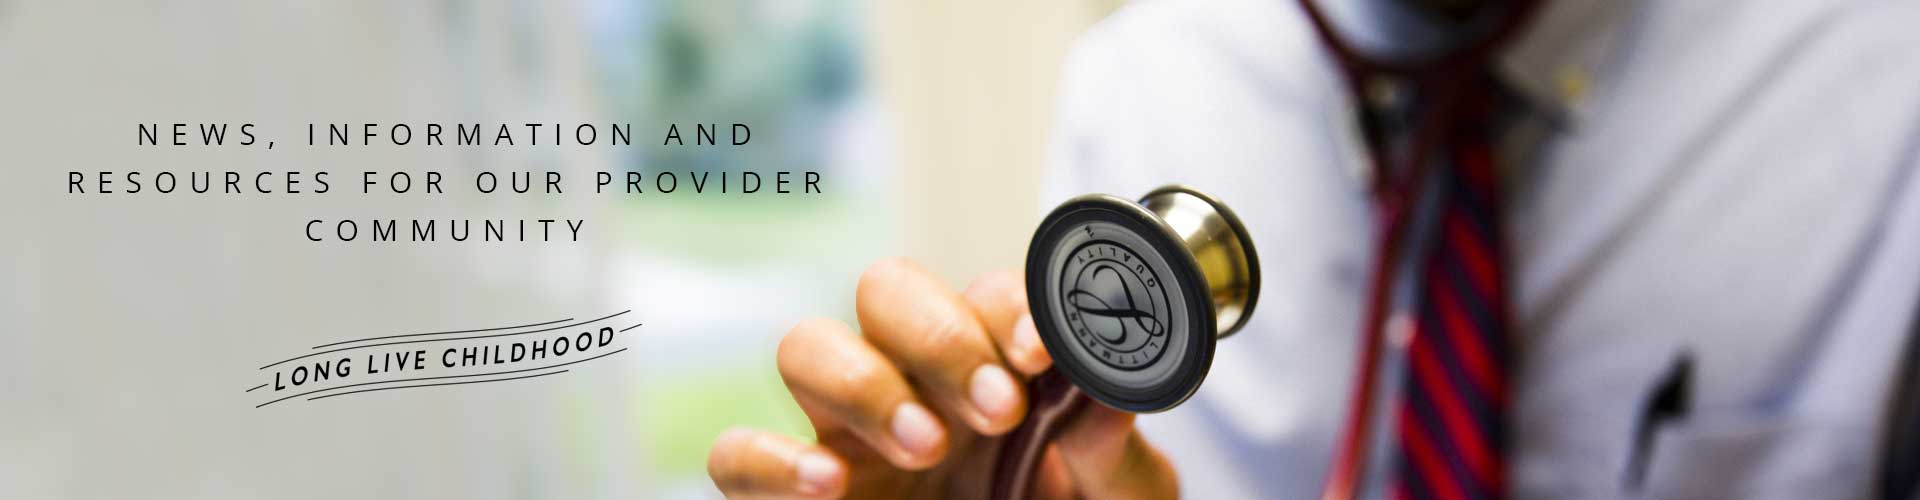 provider holding a stethoscope